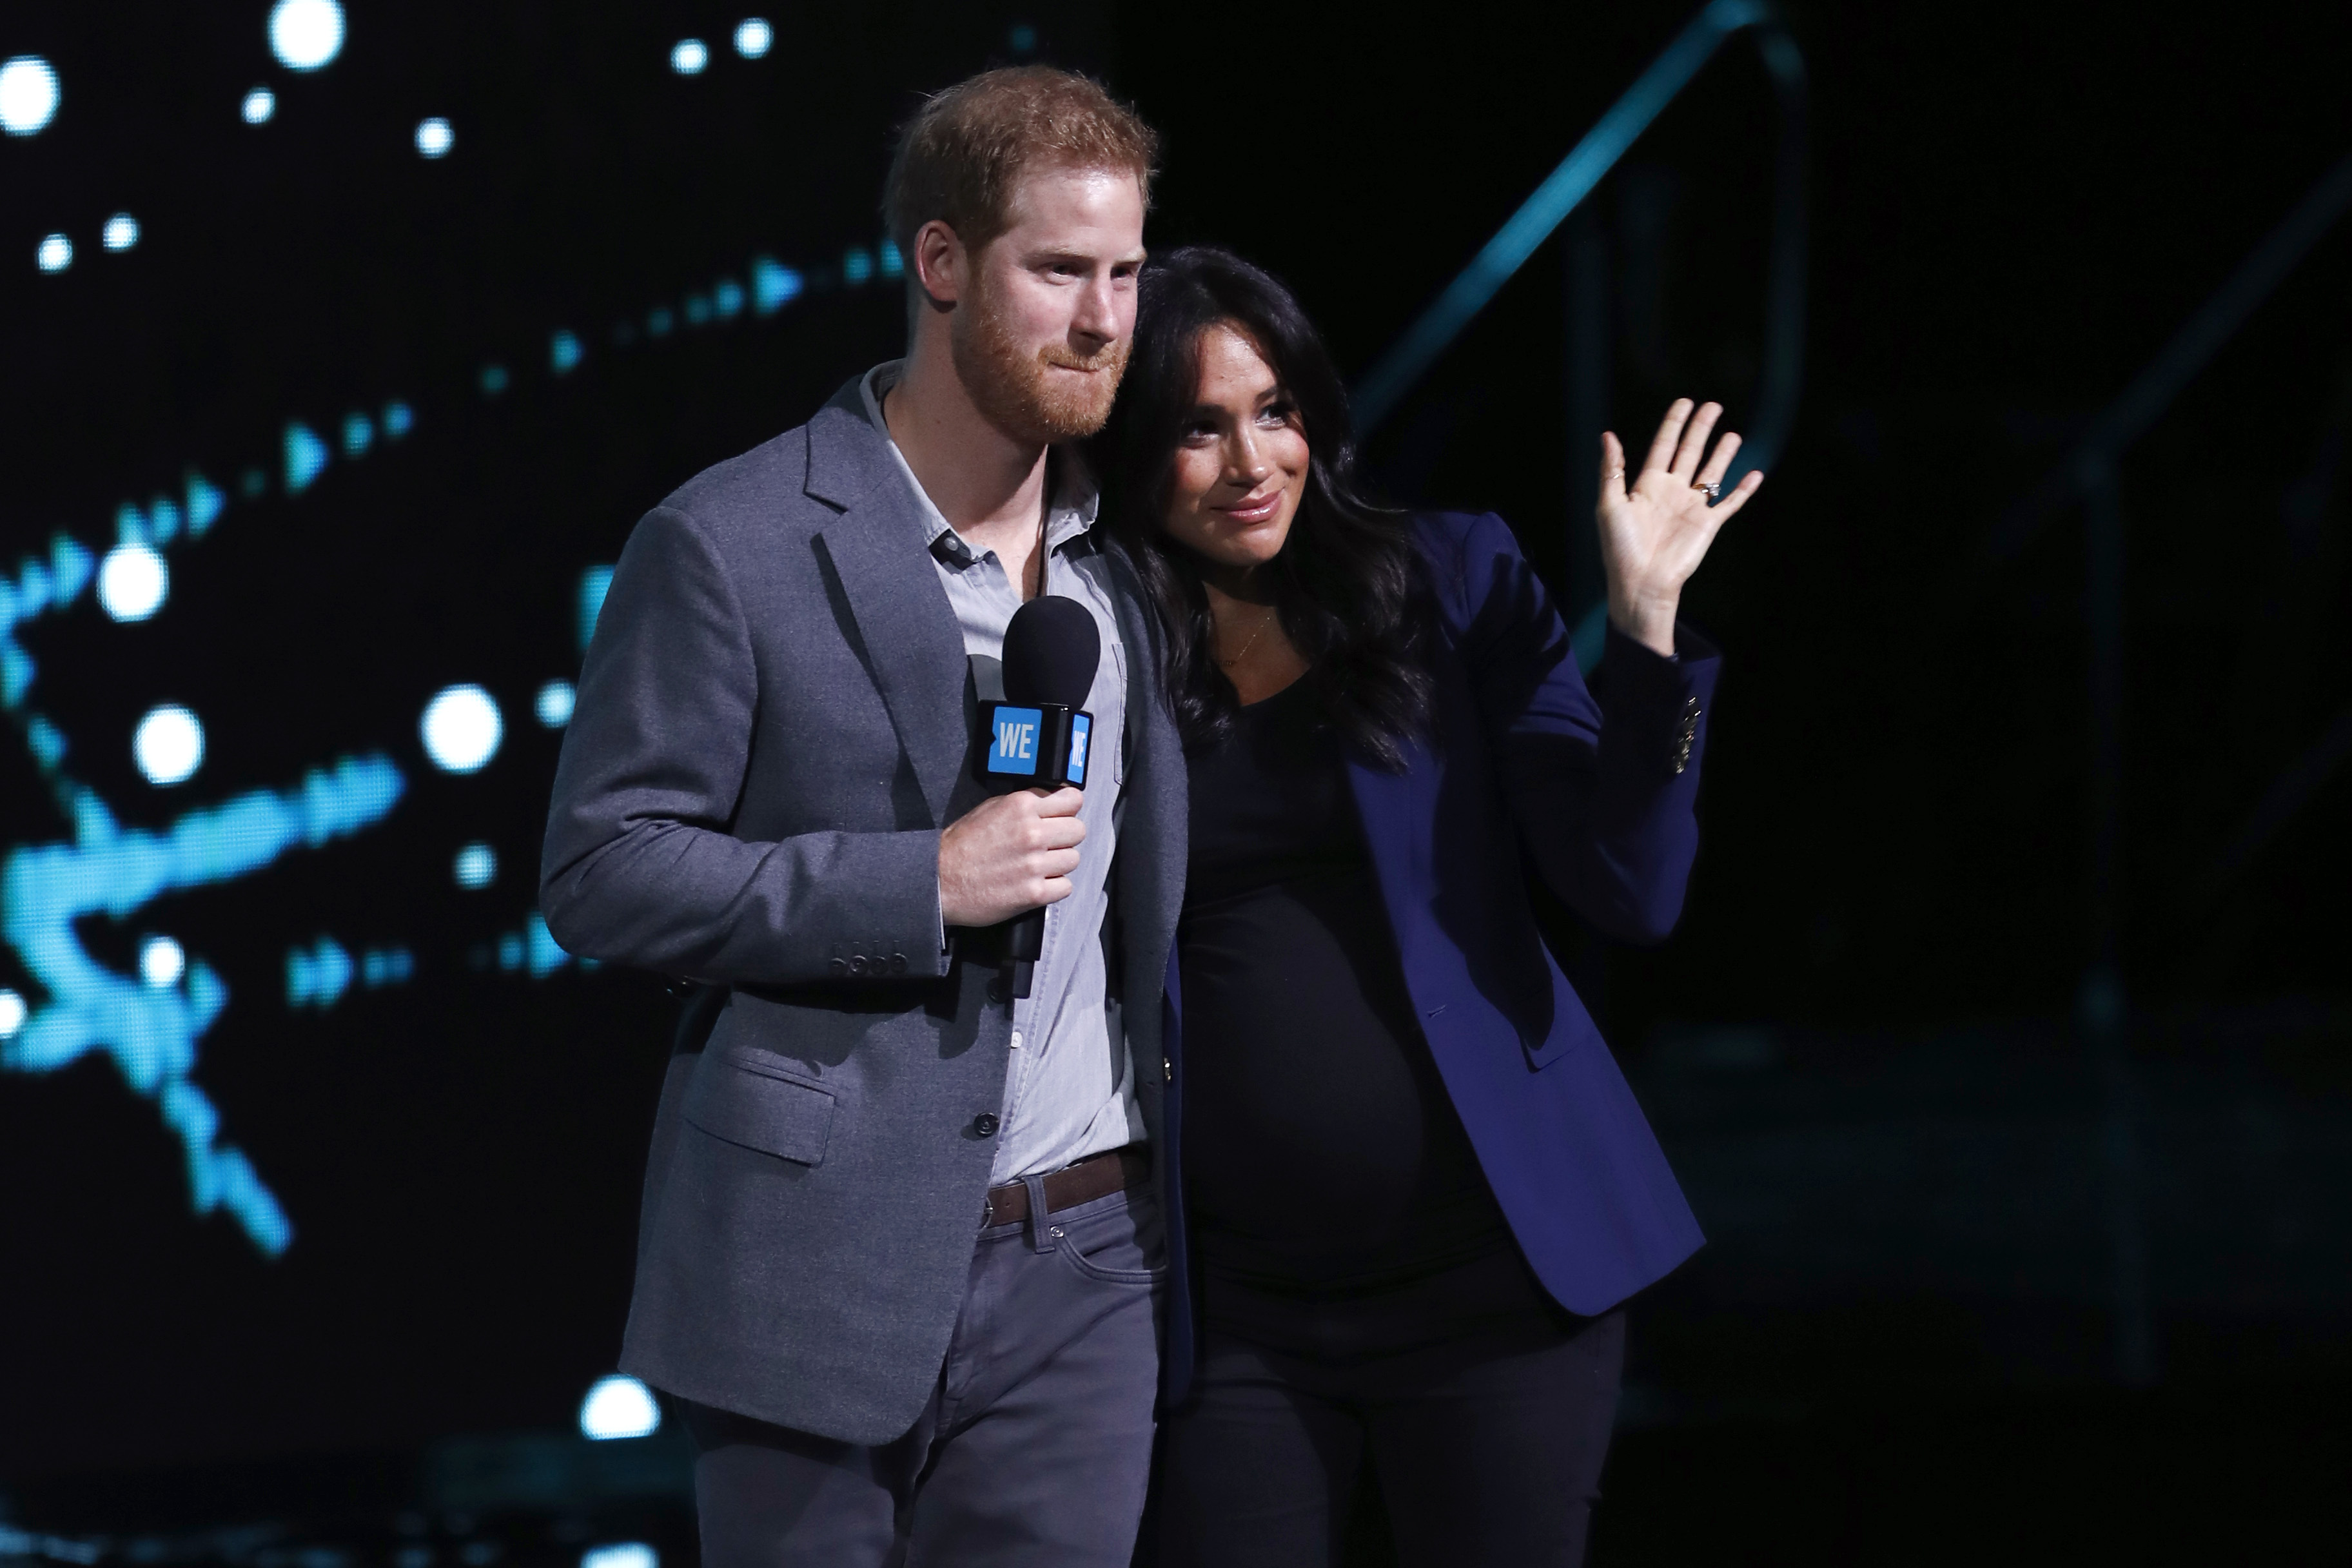 Prince Harry and Meghan Markle at WE Day UK 2019